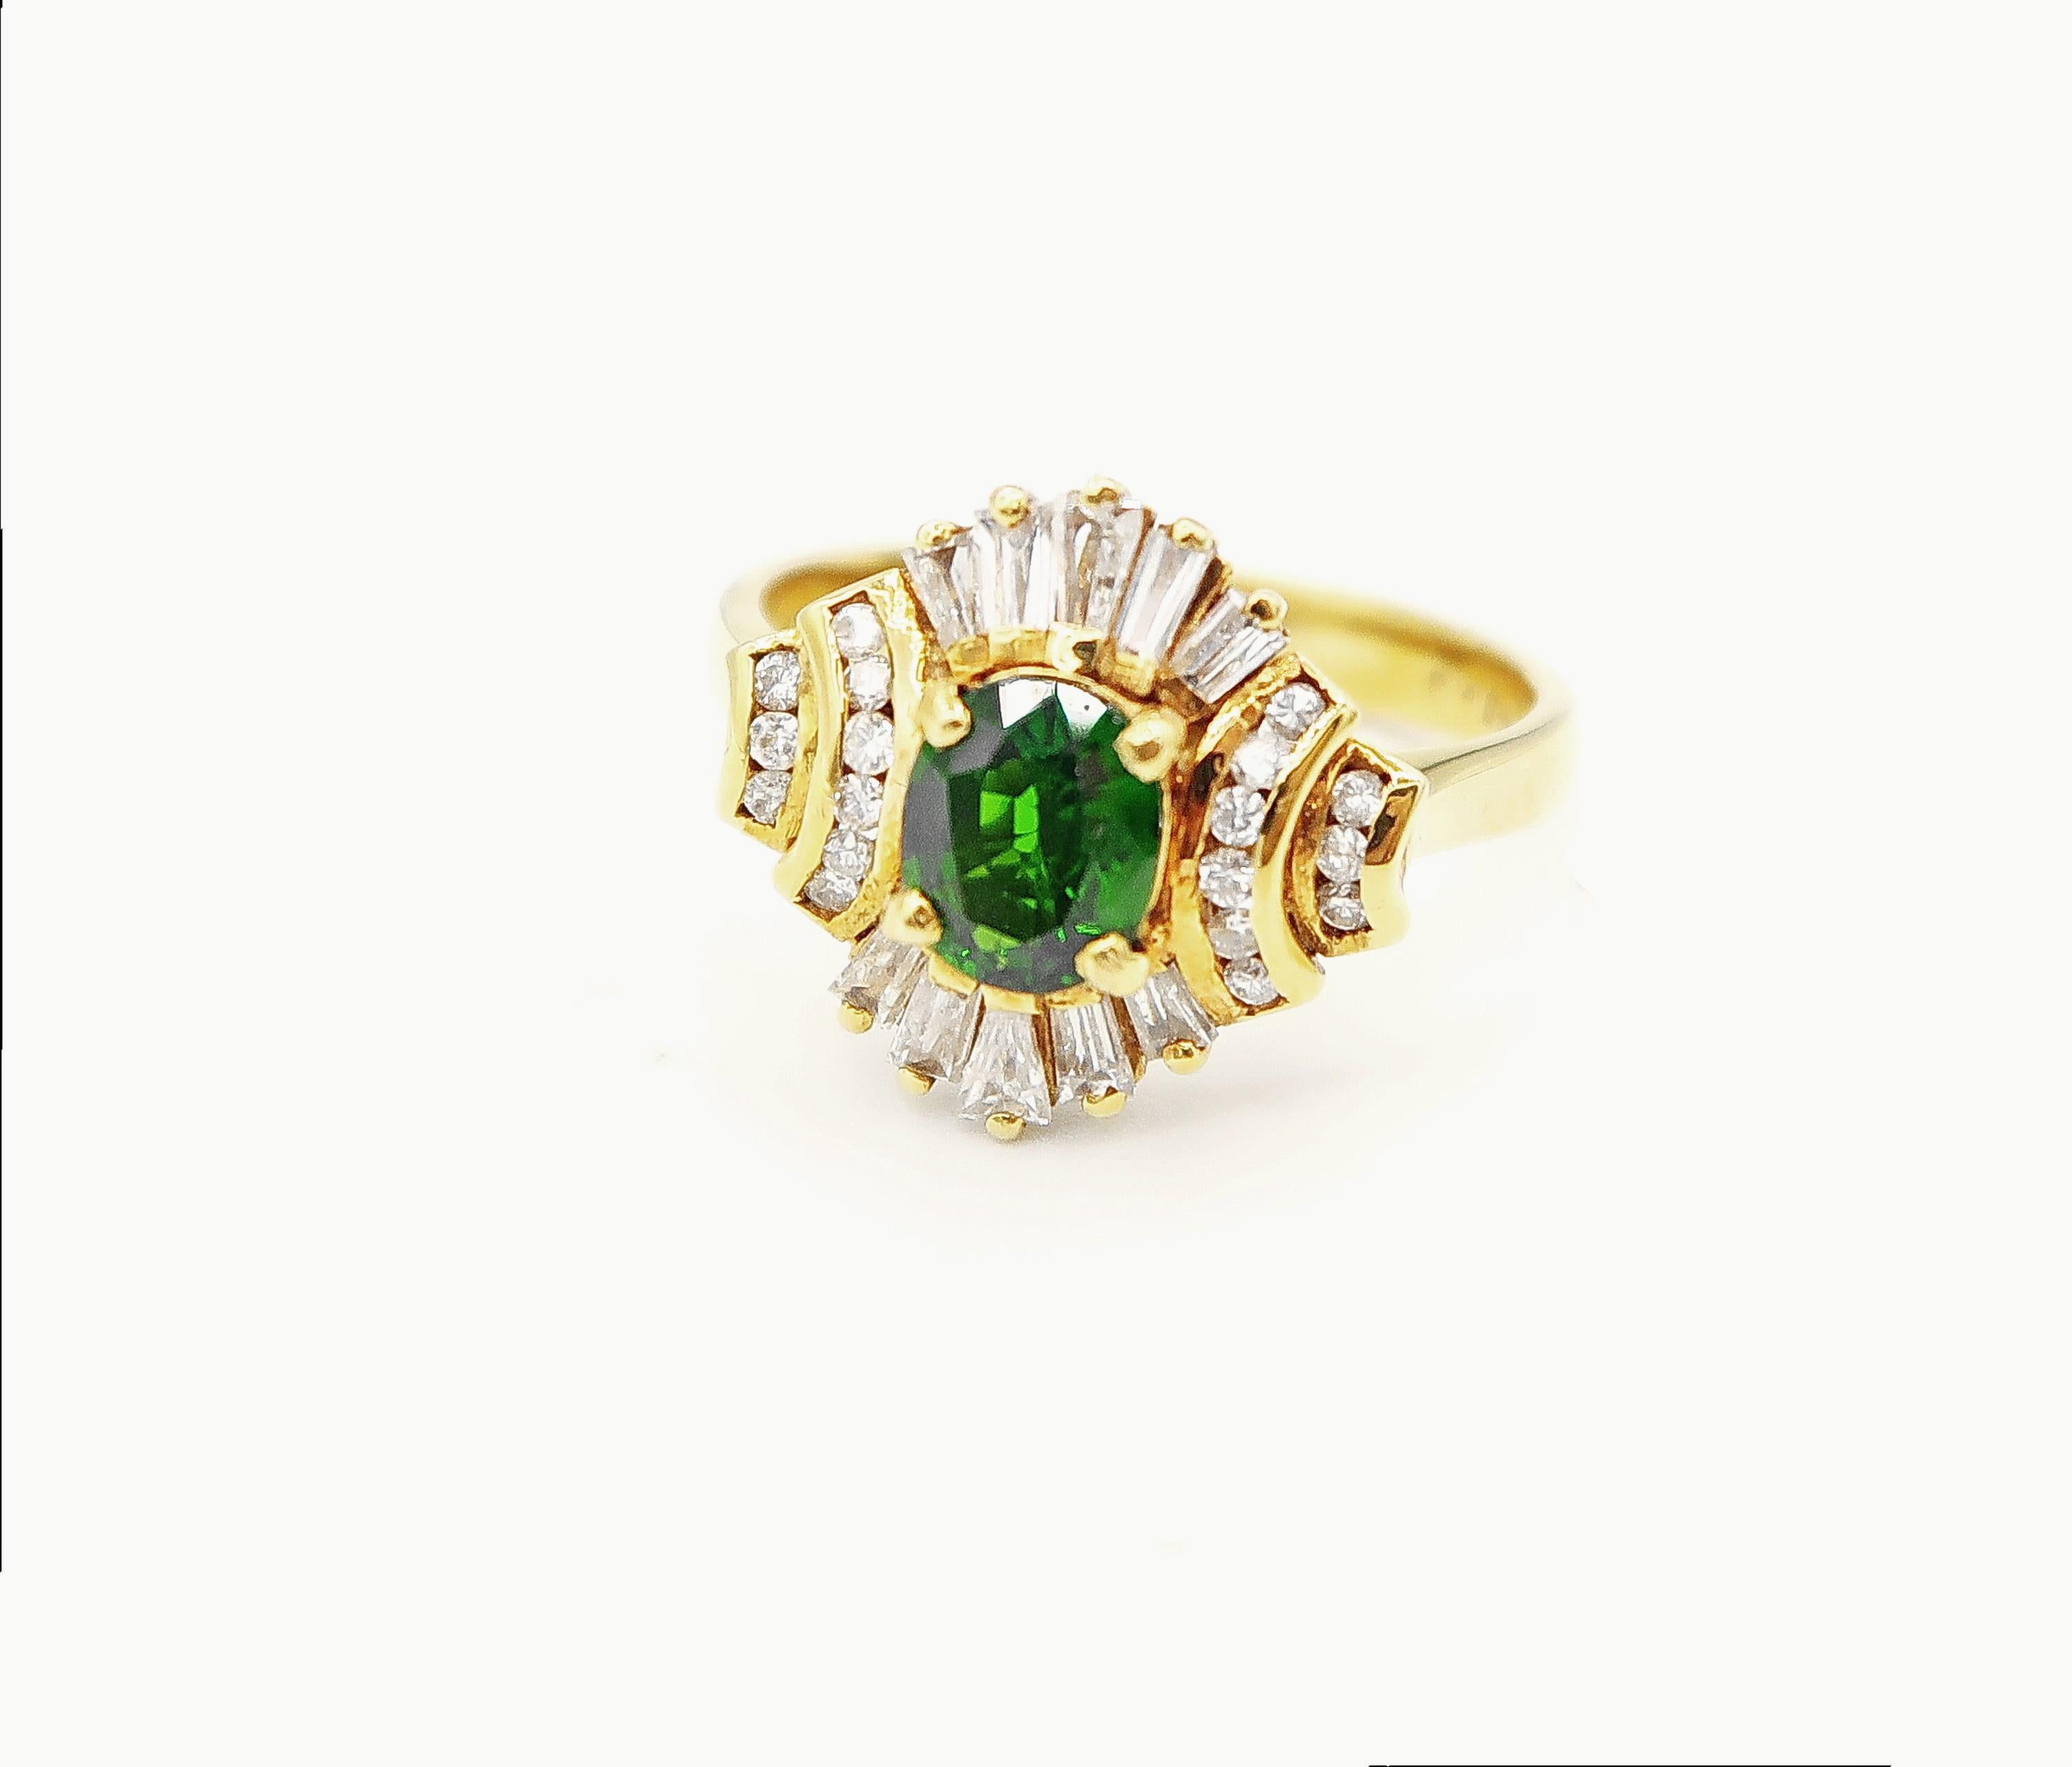 Fine Vintage Tsavorite and Baguette Diamond Cluster Ring in 18K Yellow Gold

Ring size: 55 1/2, US 7 1/2, UK O

Gold: 18K Yellow Gold 6.72 g
Tsavorite: 0.84 ct
Diamond: Baguette and Brilliant, 1.00 ct in total
